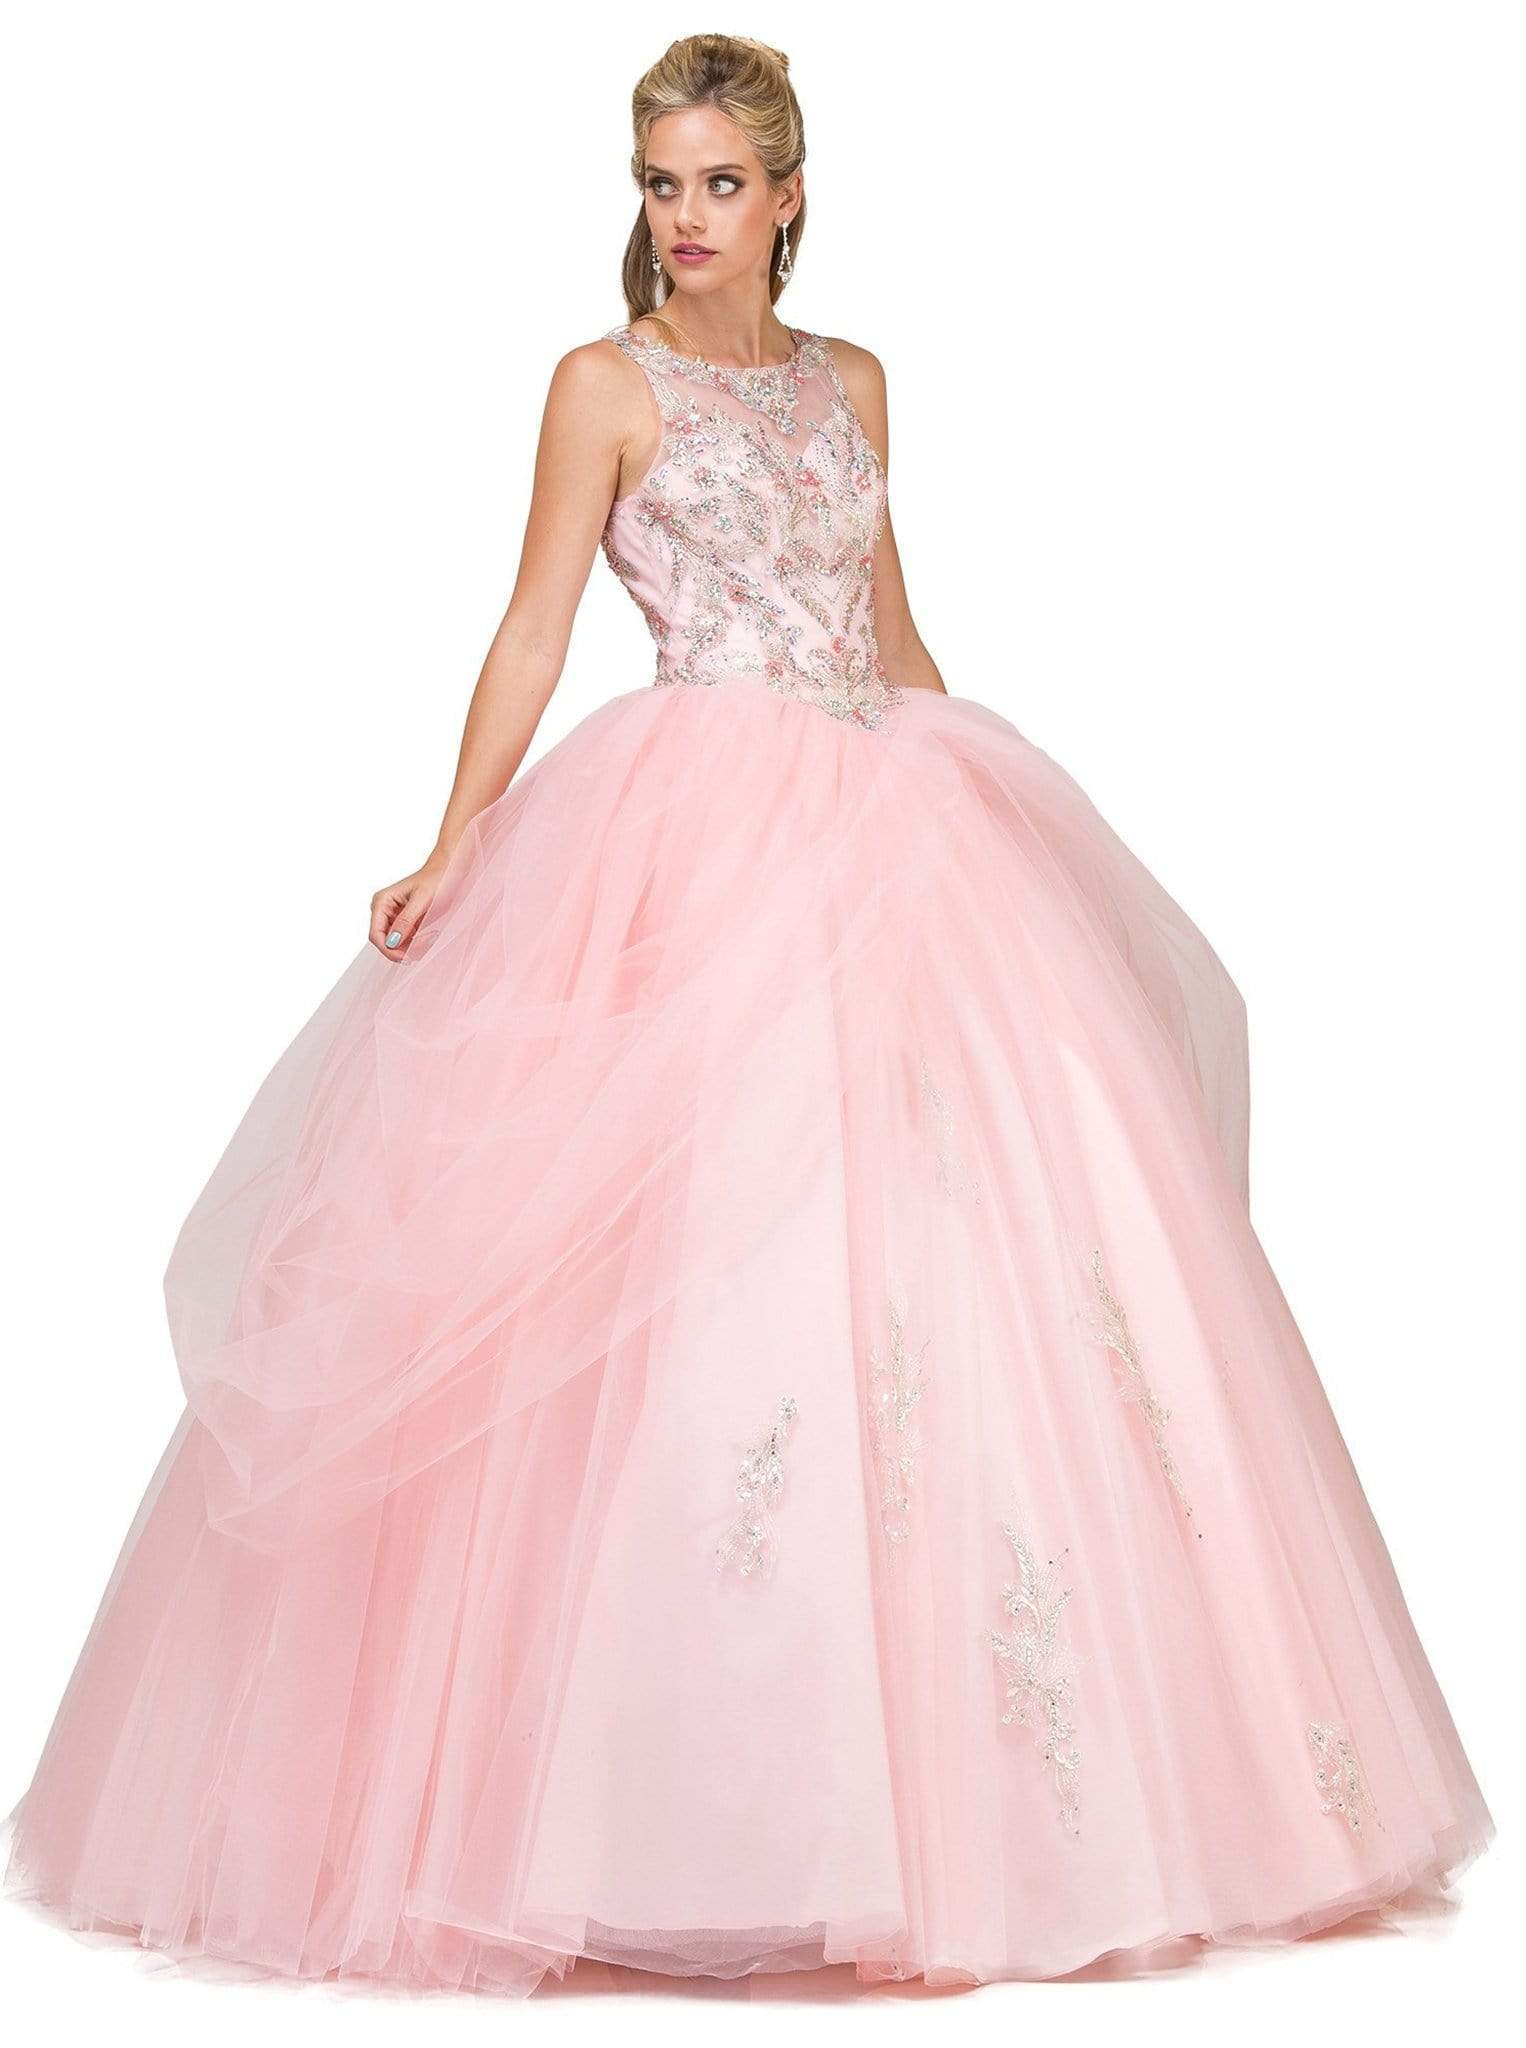 Image of Dancing Queen - 1179 Jeweled Draped Illusion Ballgown